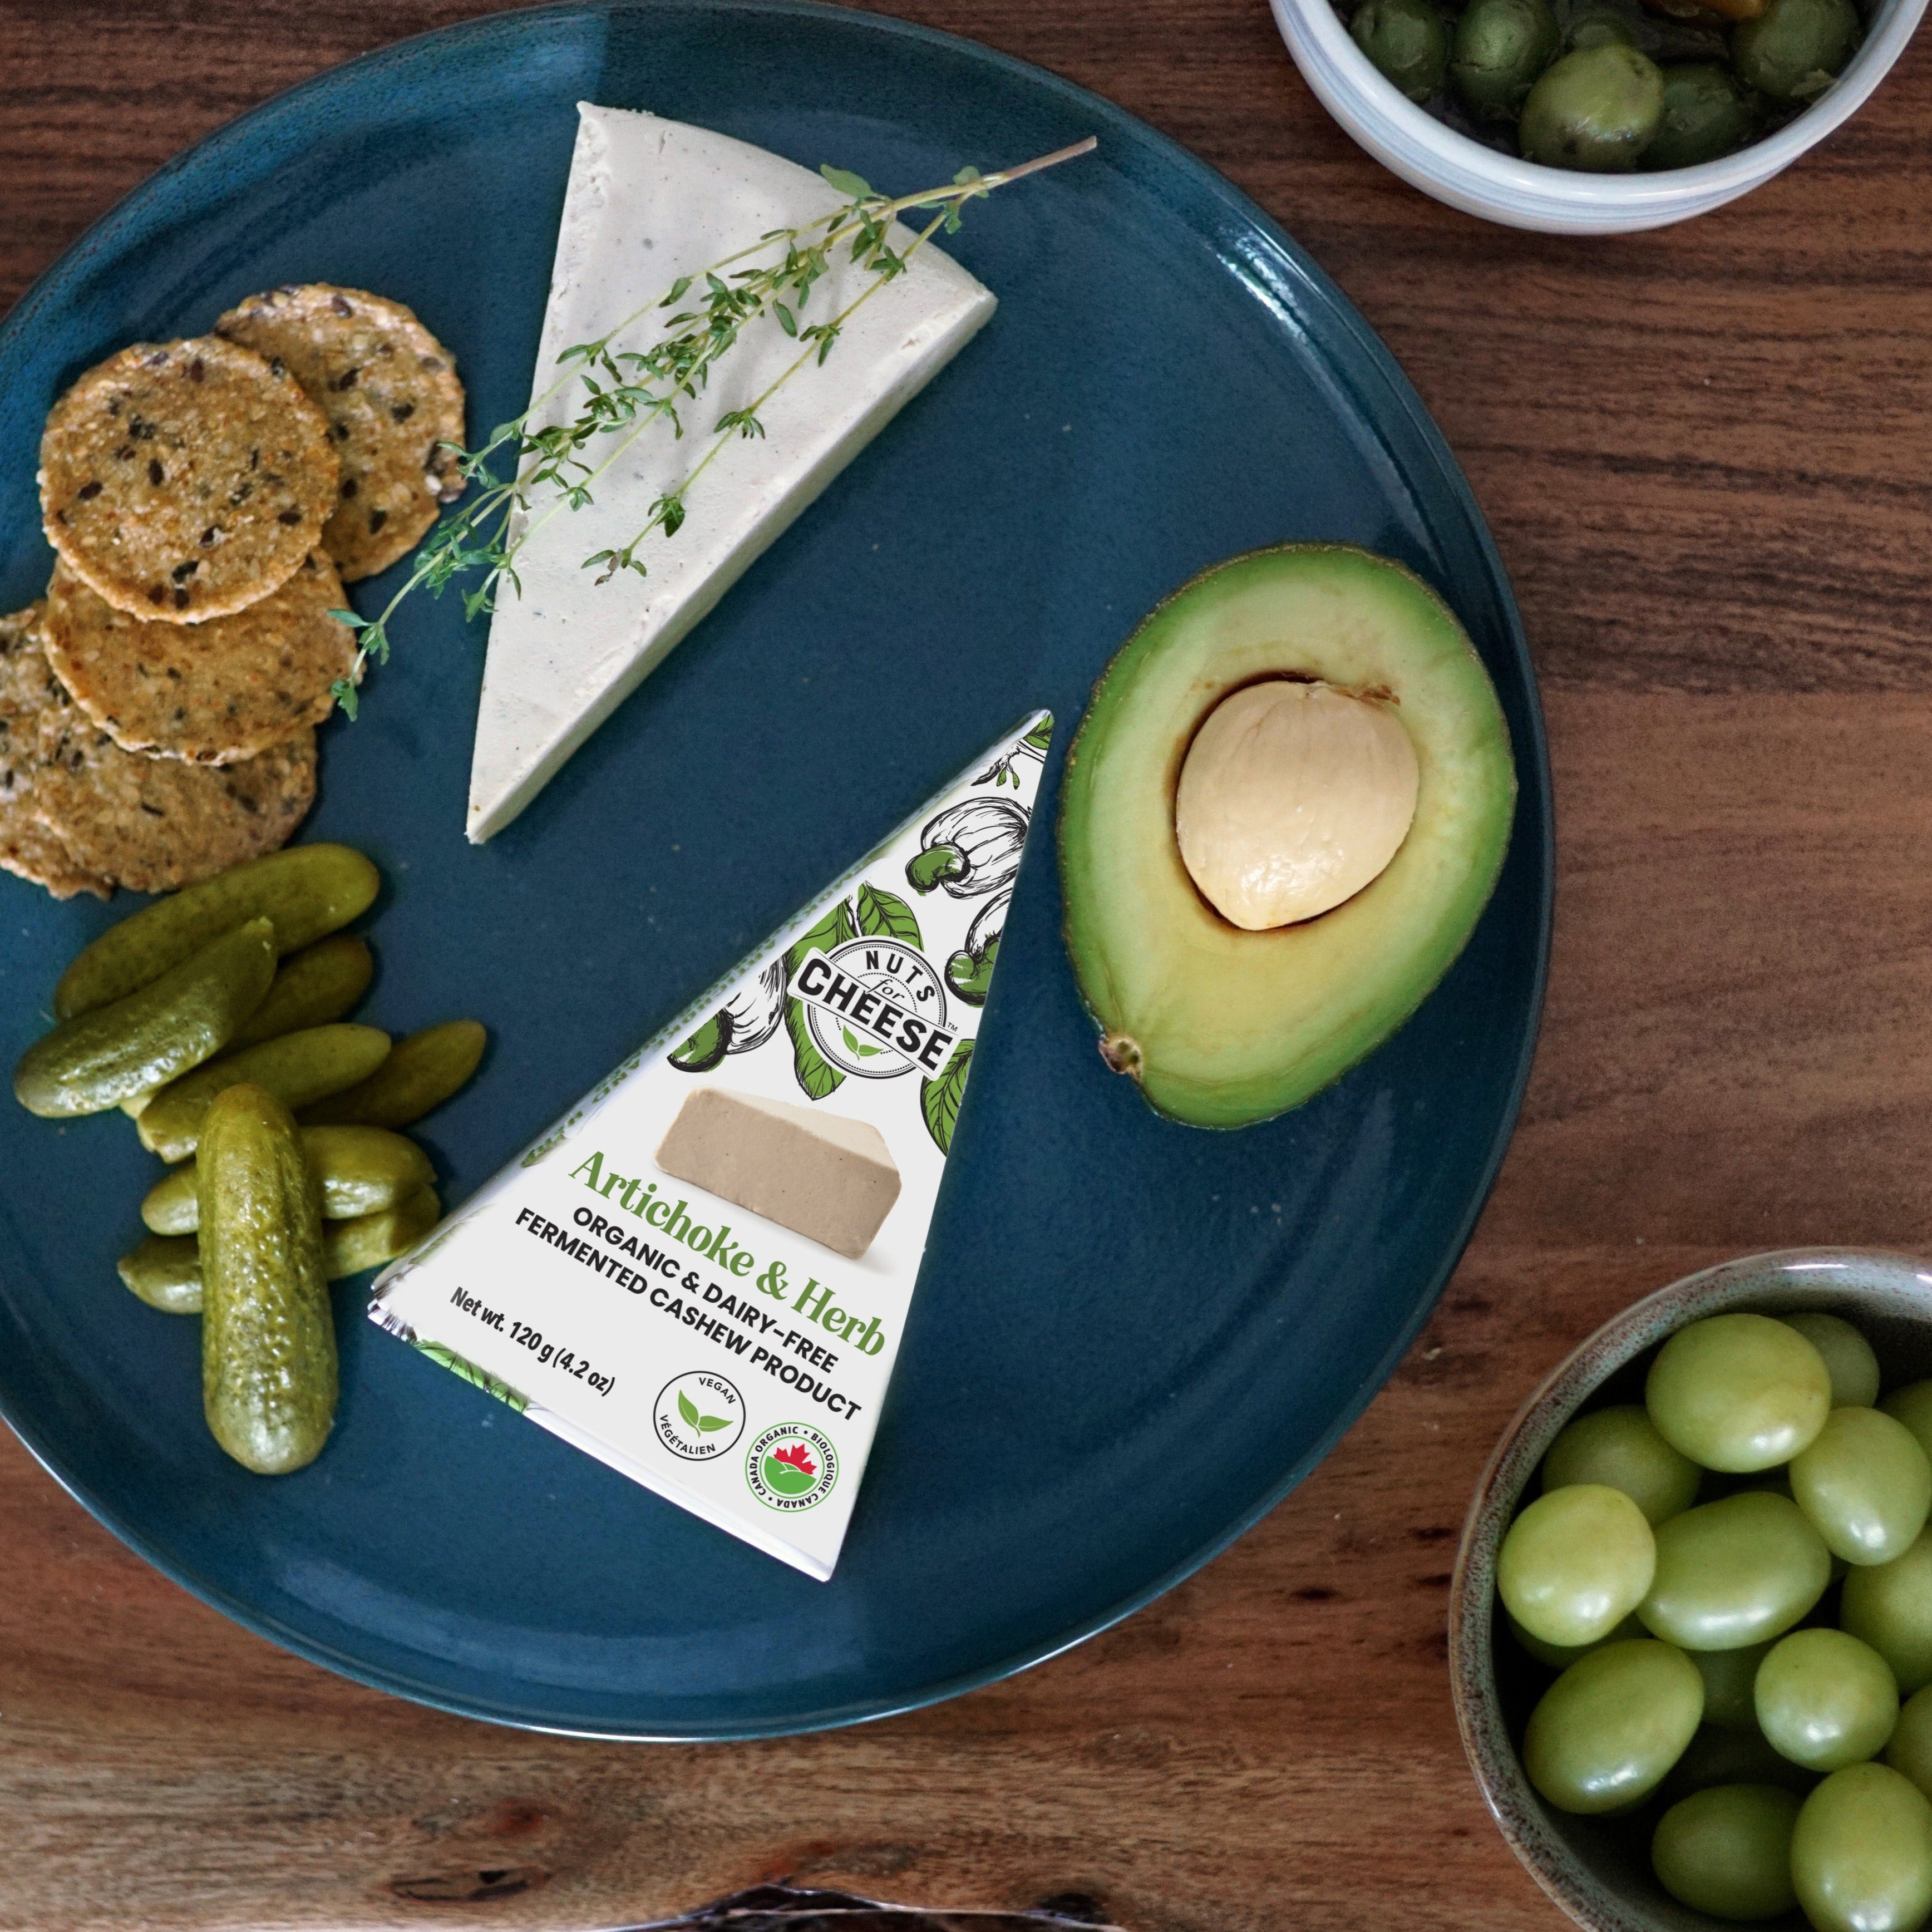 Nuts For Cheese™ Organic & dairy-free fermented Artichoke & Herb cheese wedge plated on a wooden table with pickles, crackers, olives and avocado